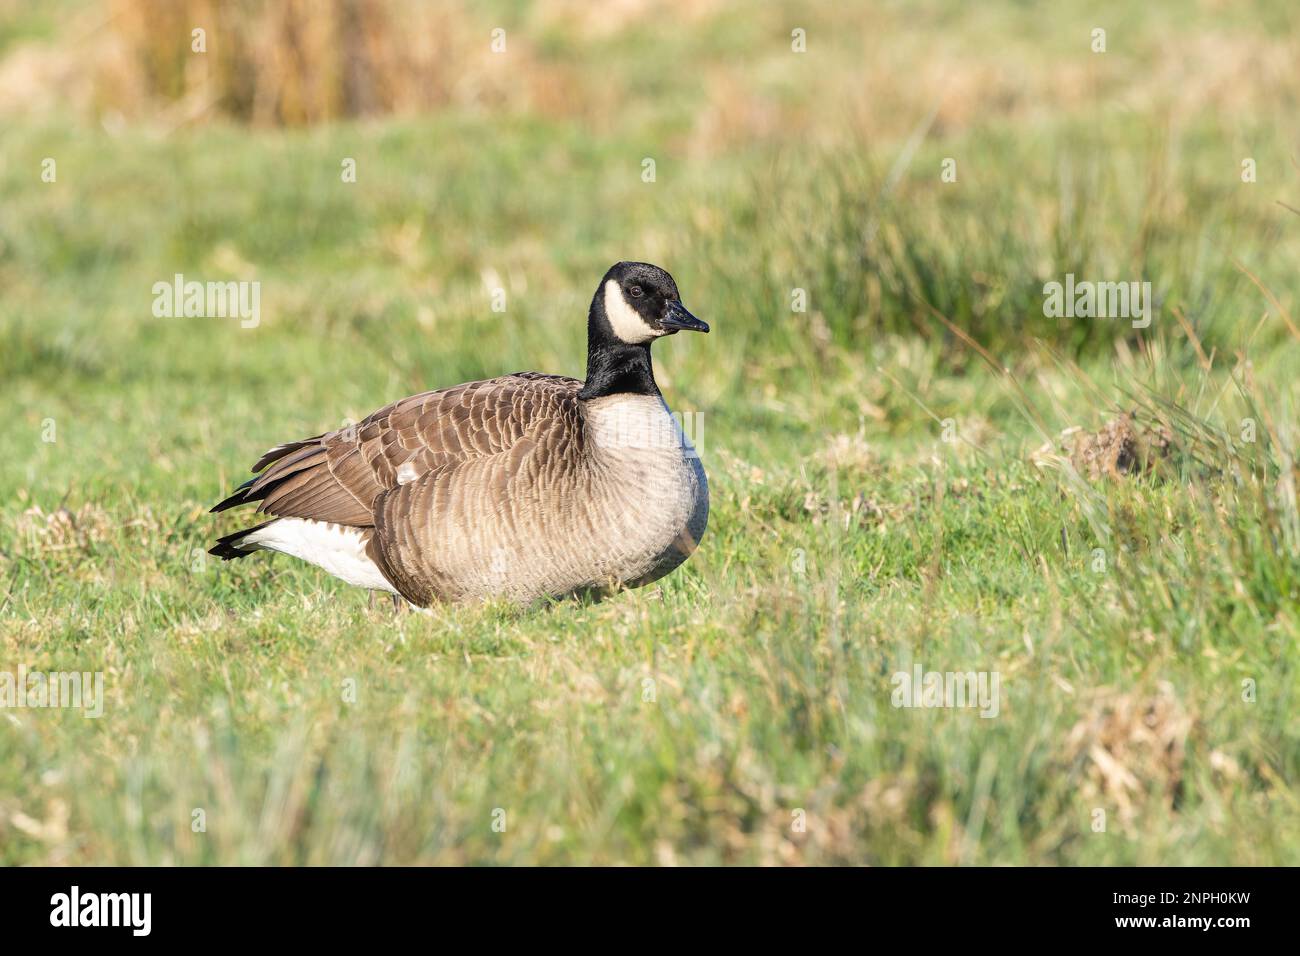 Close up of Small Canada Goose, Branta hutchinsii, with white nape throatband foraging in a green grassy meadow with attentive look in the eyes Stock Photo